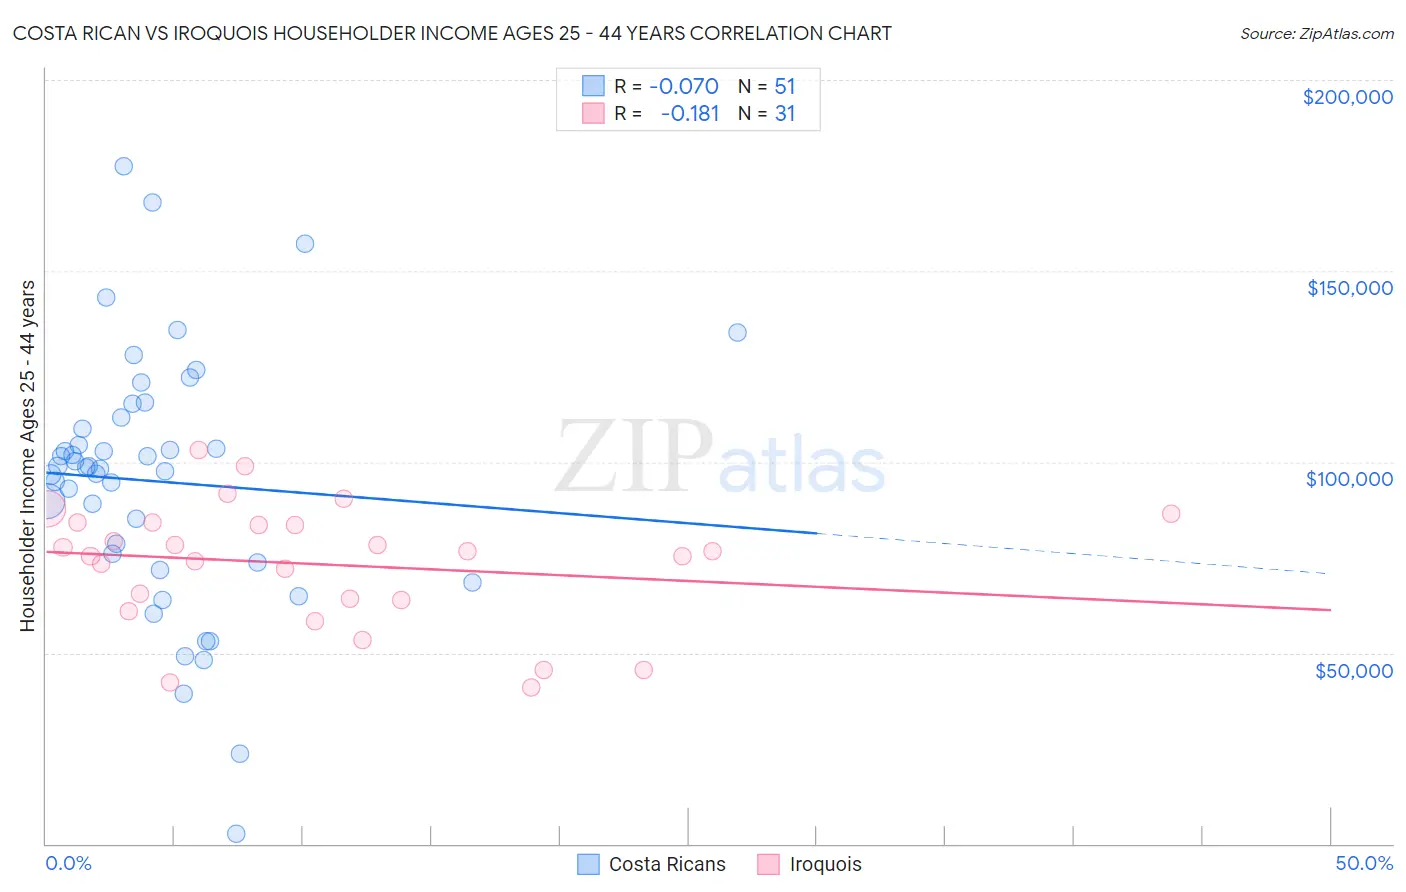 Costa Rican vs Iroquois Householder Income Ages 25 - 44 years